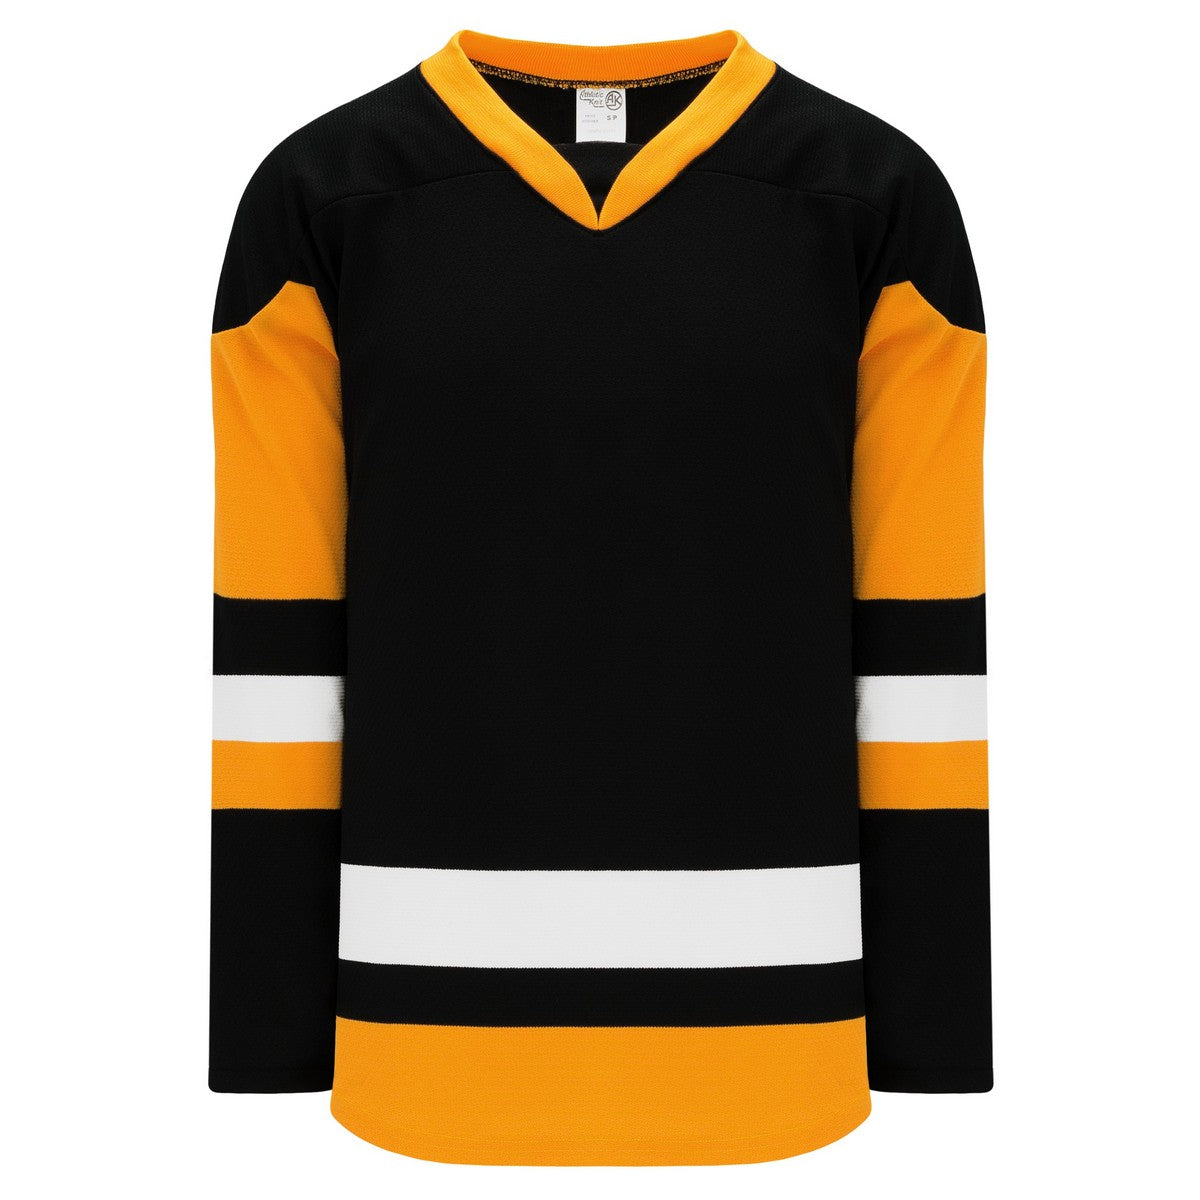 Replica Classic Style Pittsburgh Penguins 2015 Home Hockey Jersey